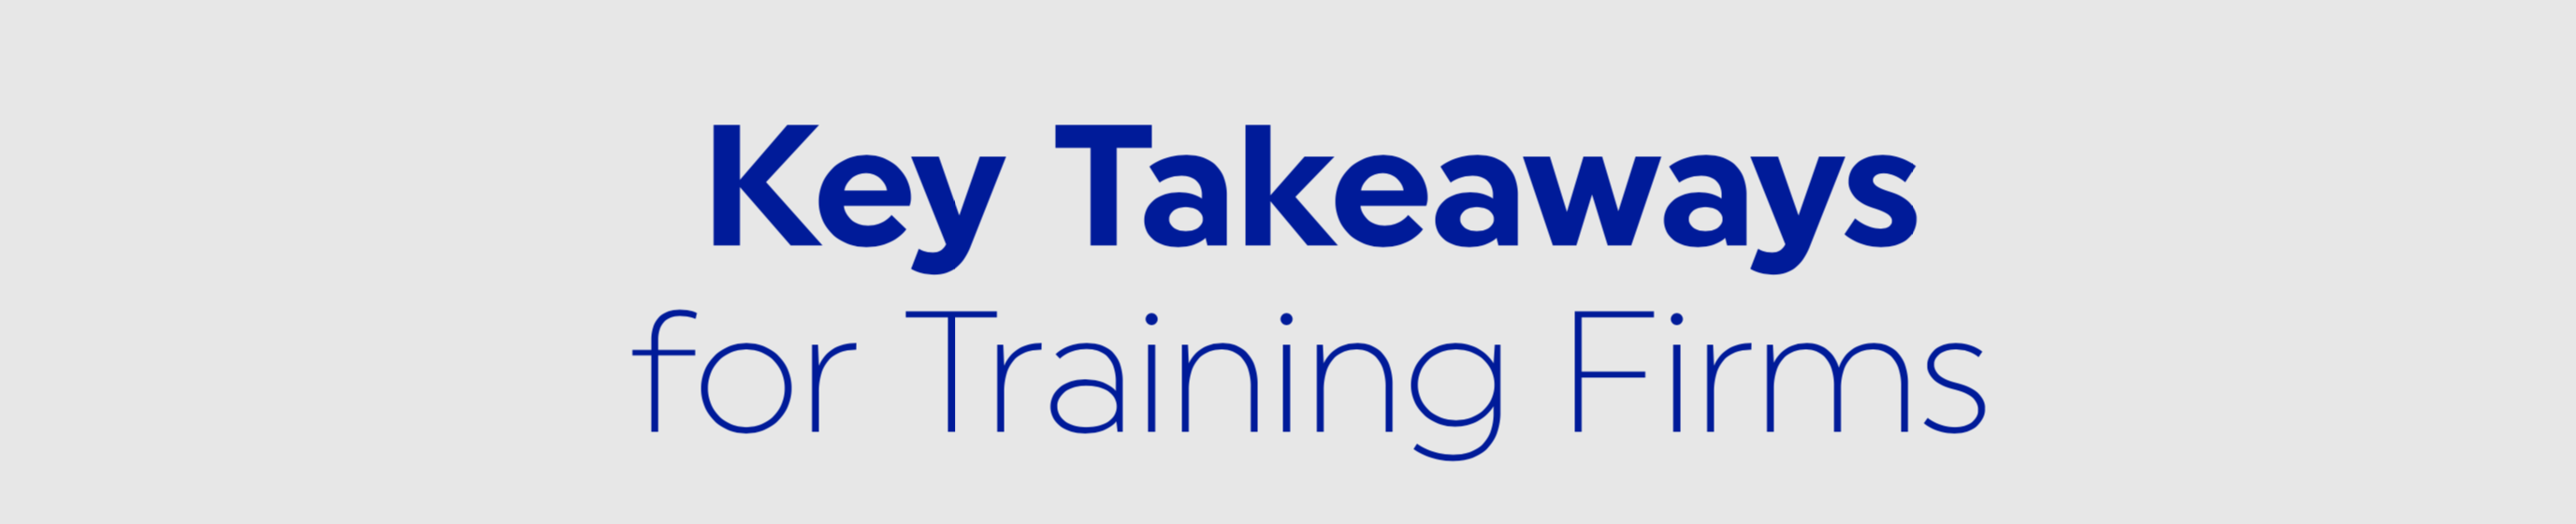 Training Firms